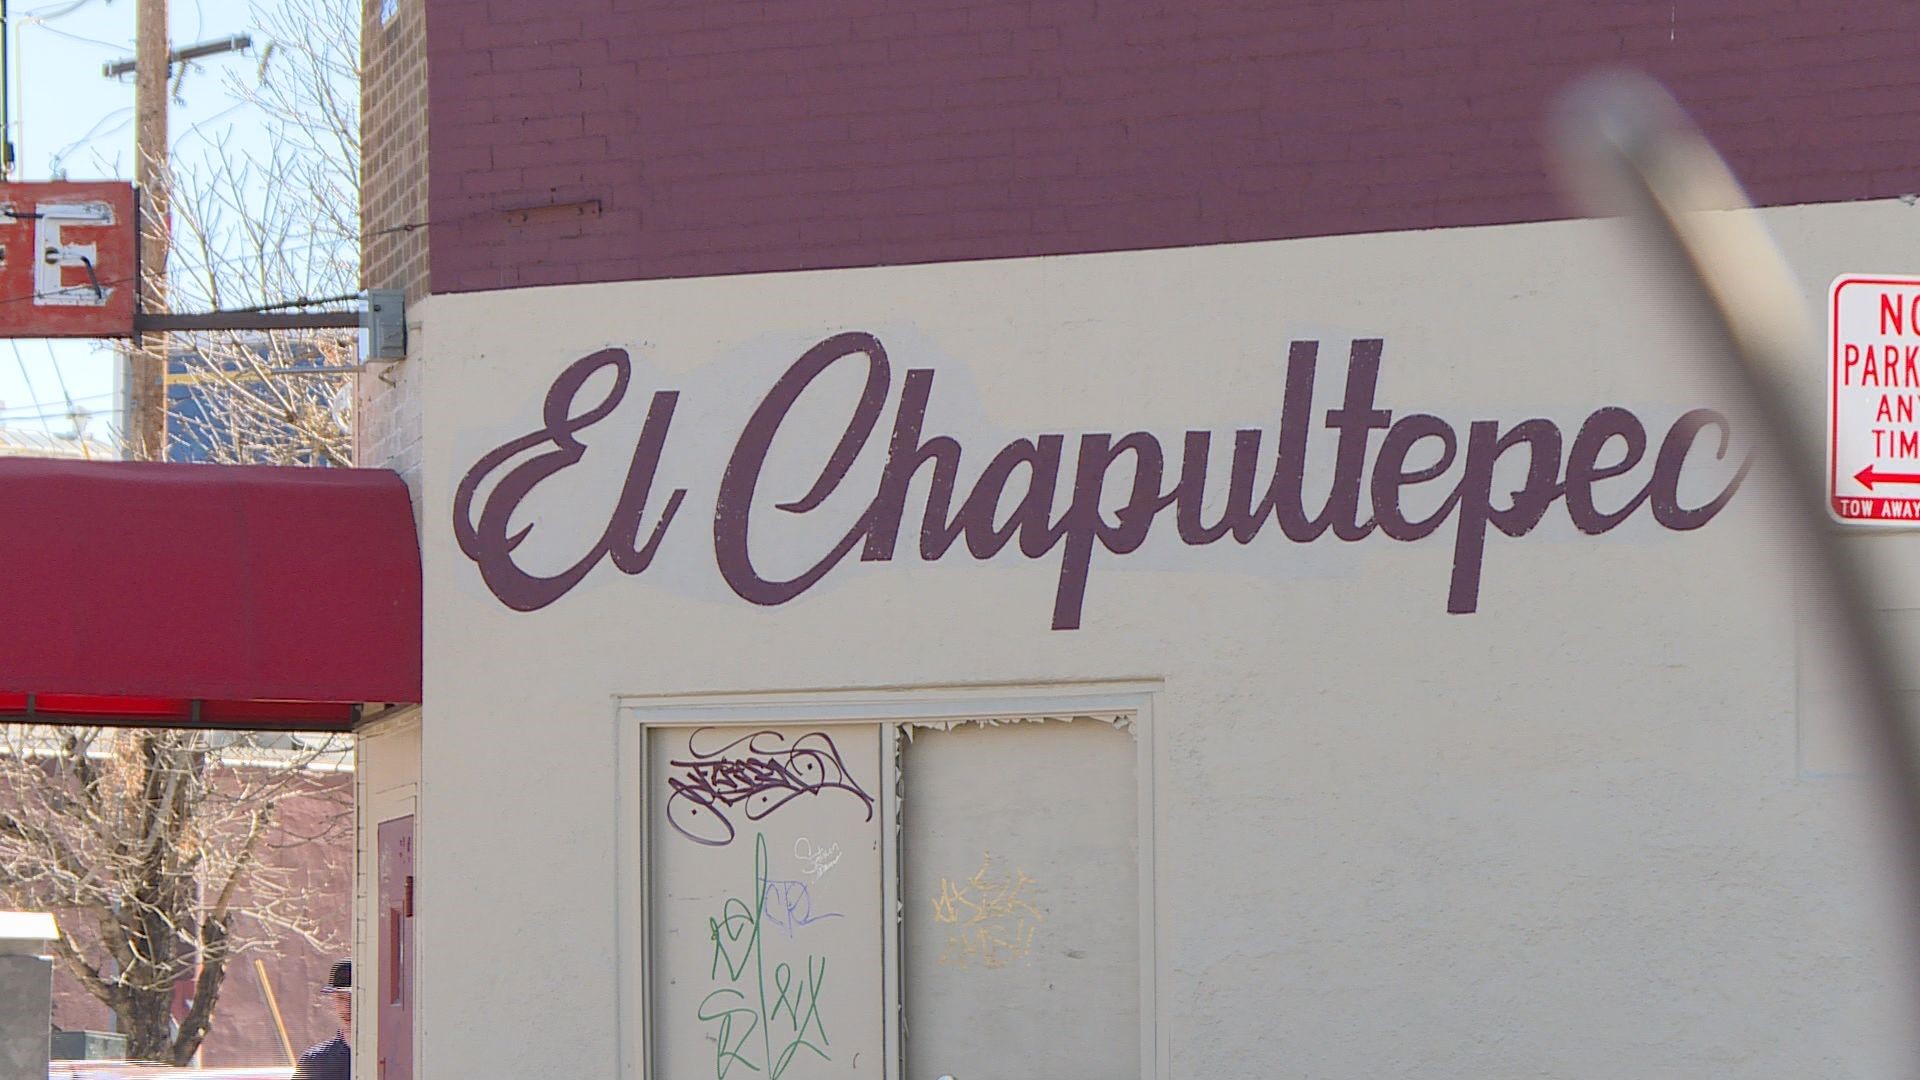 The current owners of El Chapultepec say the building's structural integrity is compromised.